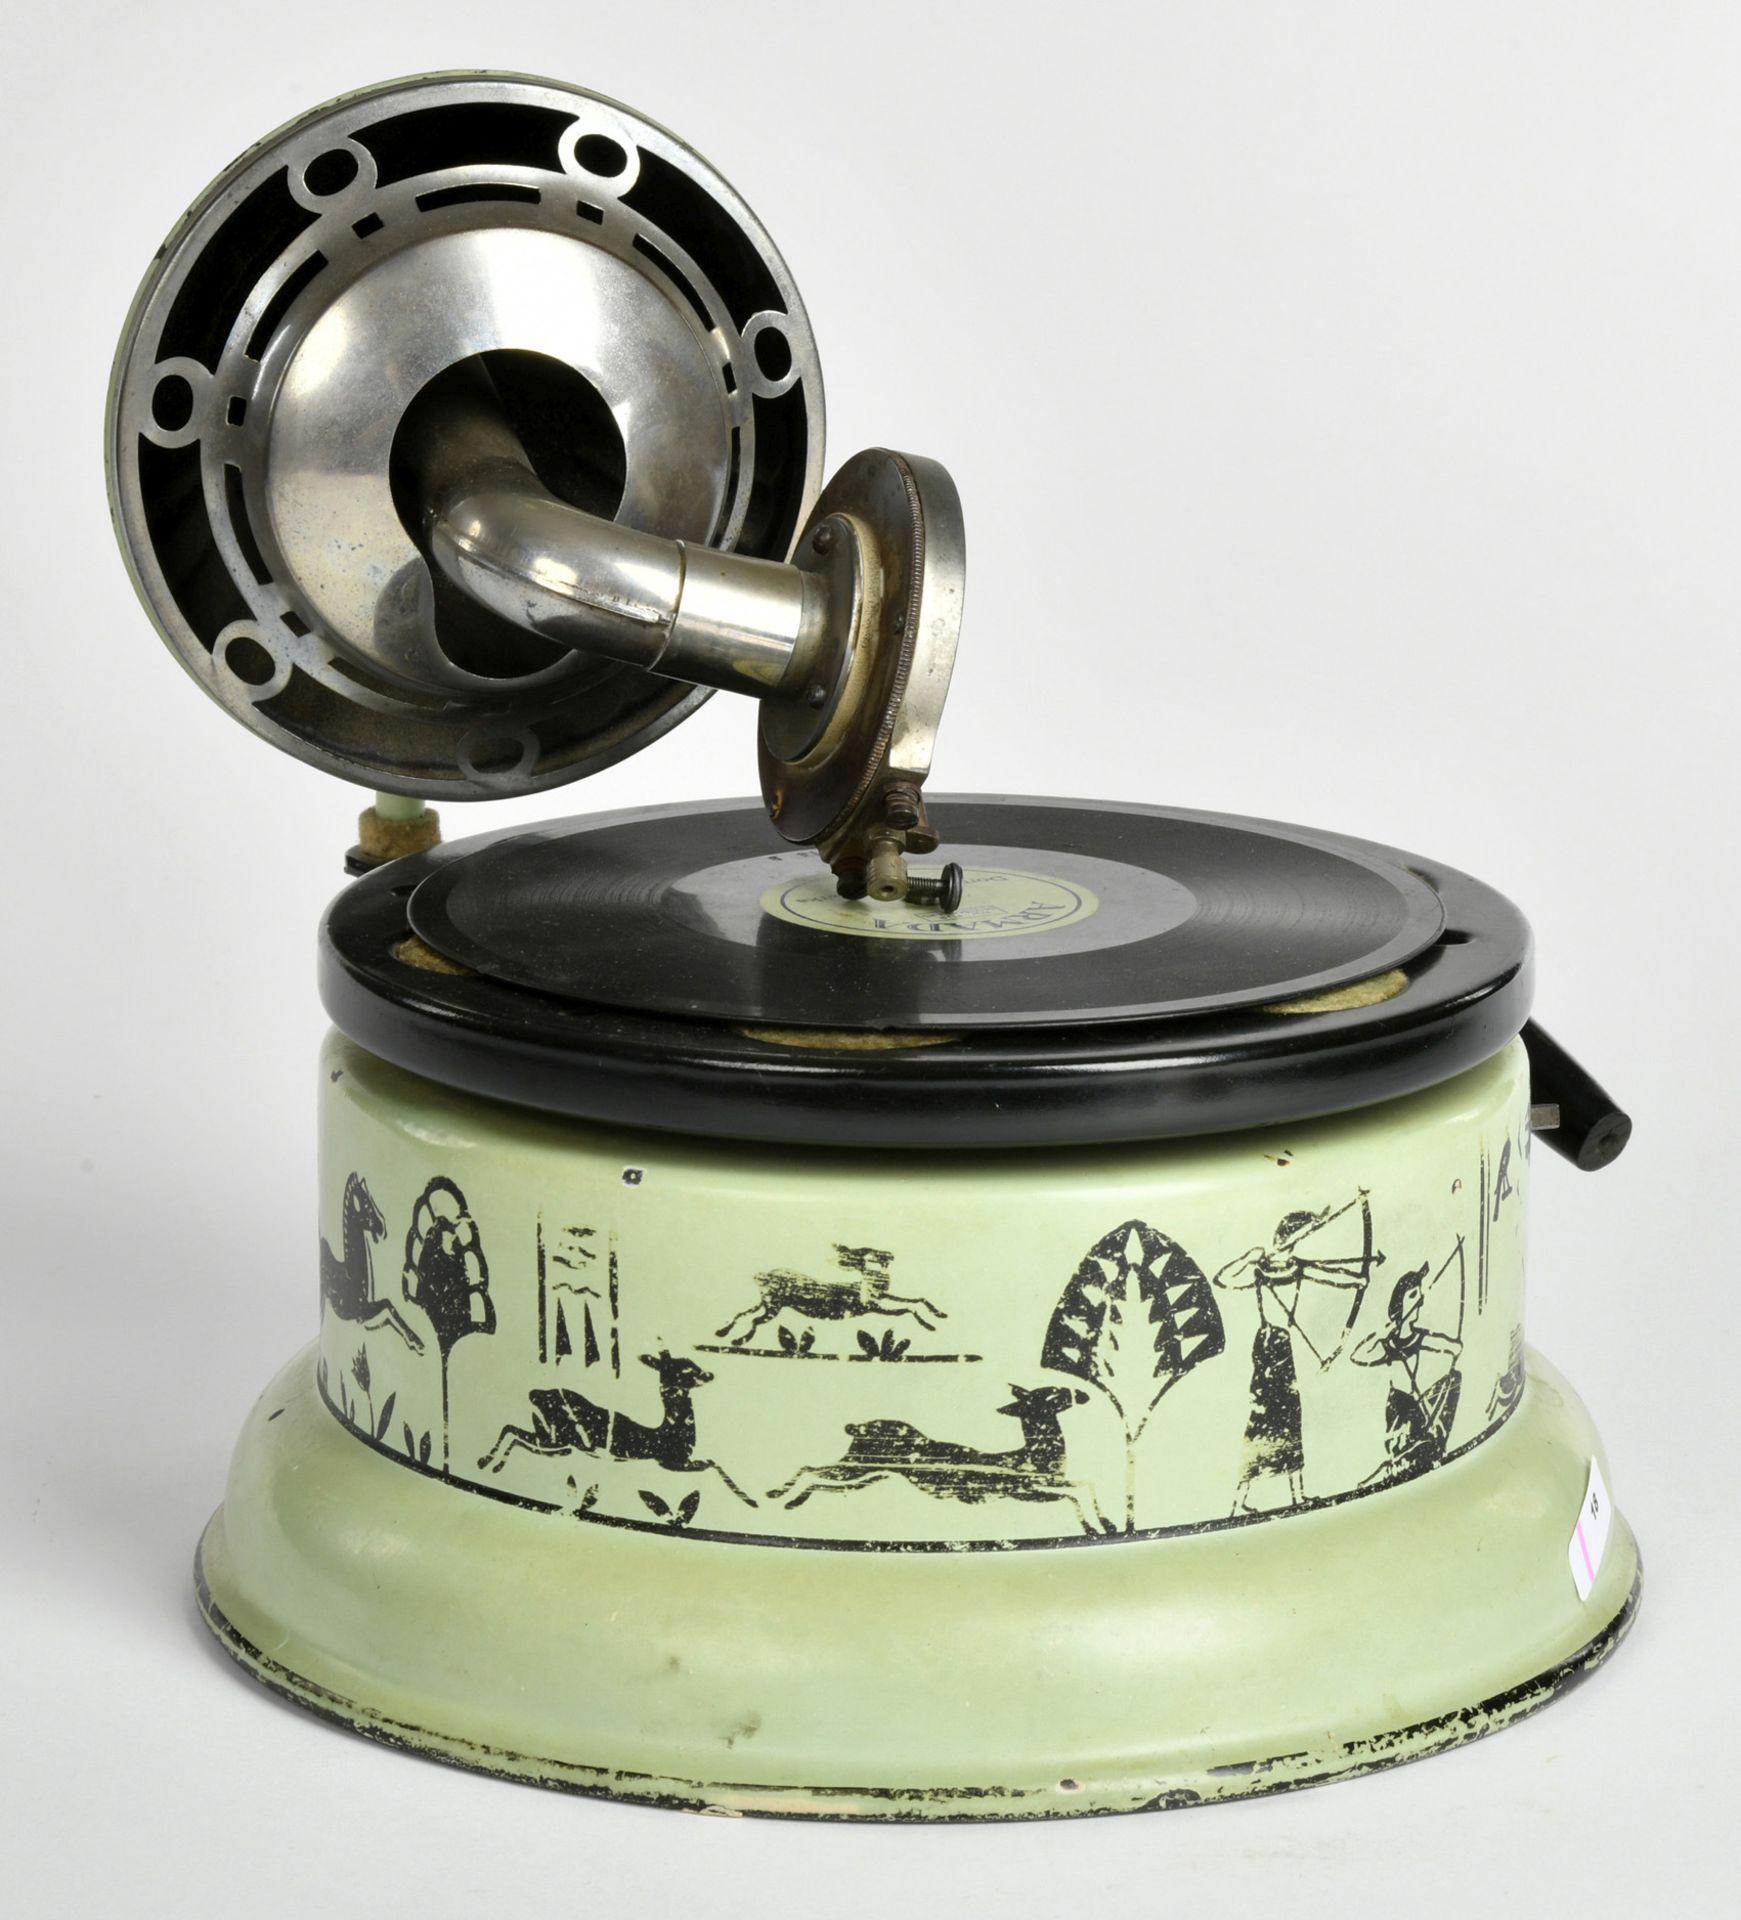 kids gramophone with egyptian motives, Germany pw, 22cm, funct. ok, min. paint d., C 2- - Image 2 of 4